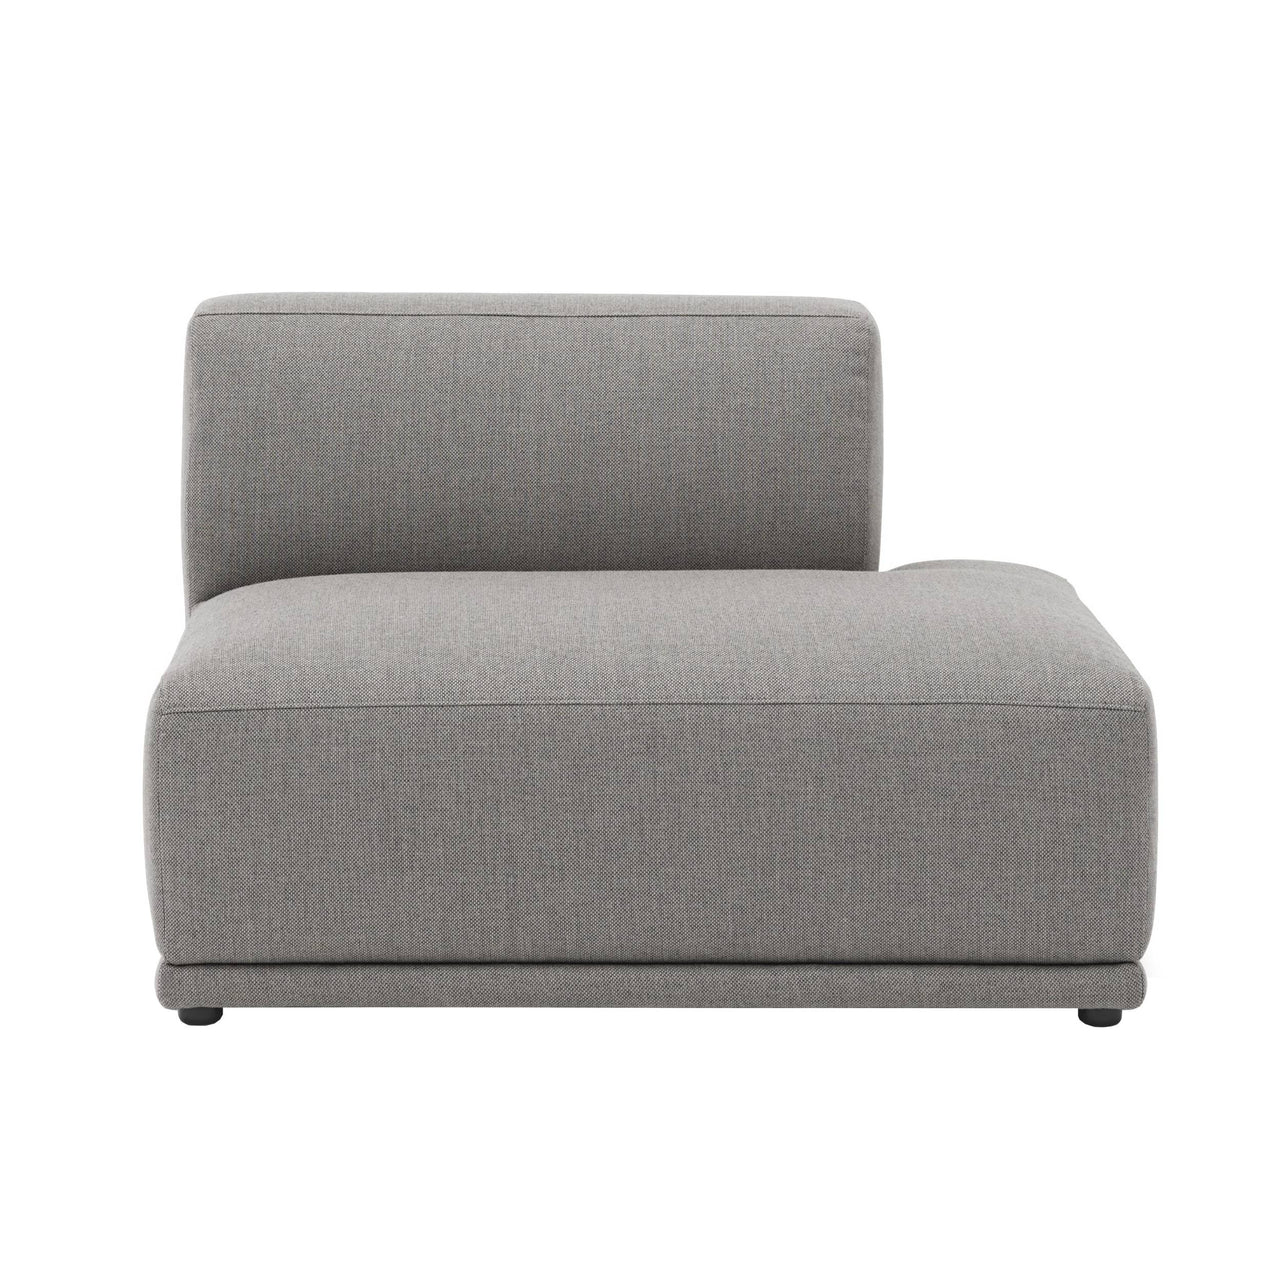 Connect Soft Sofa Modules: Right Open-Ended D